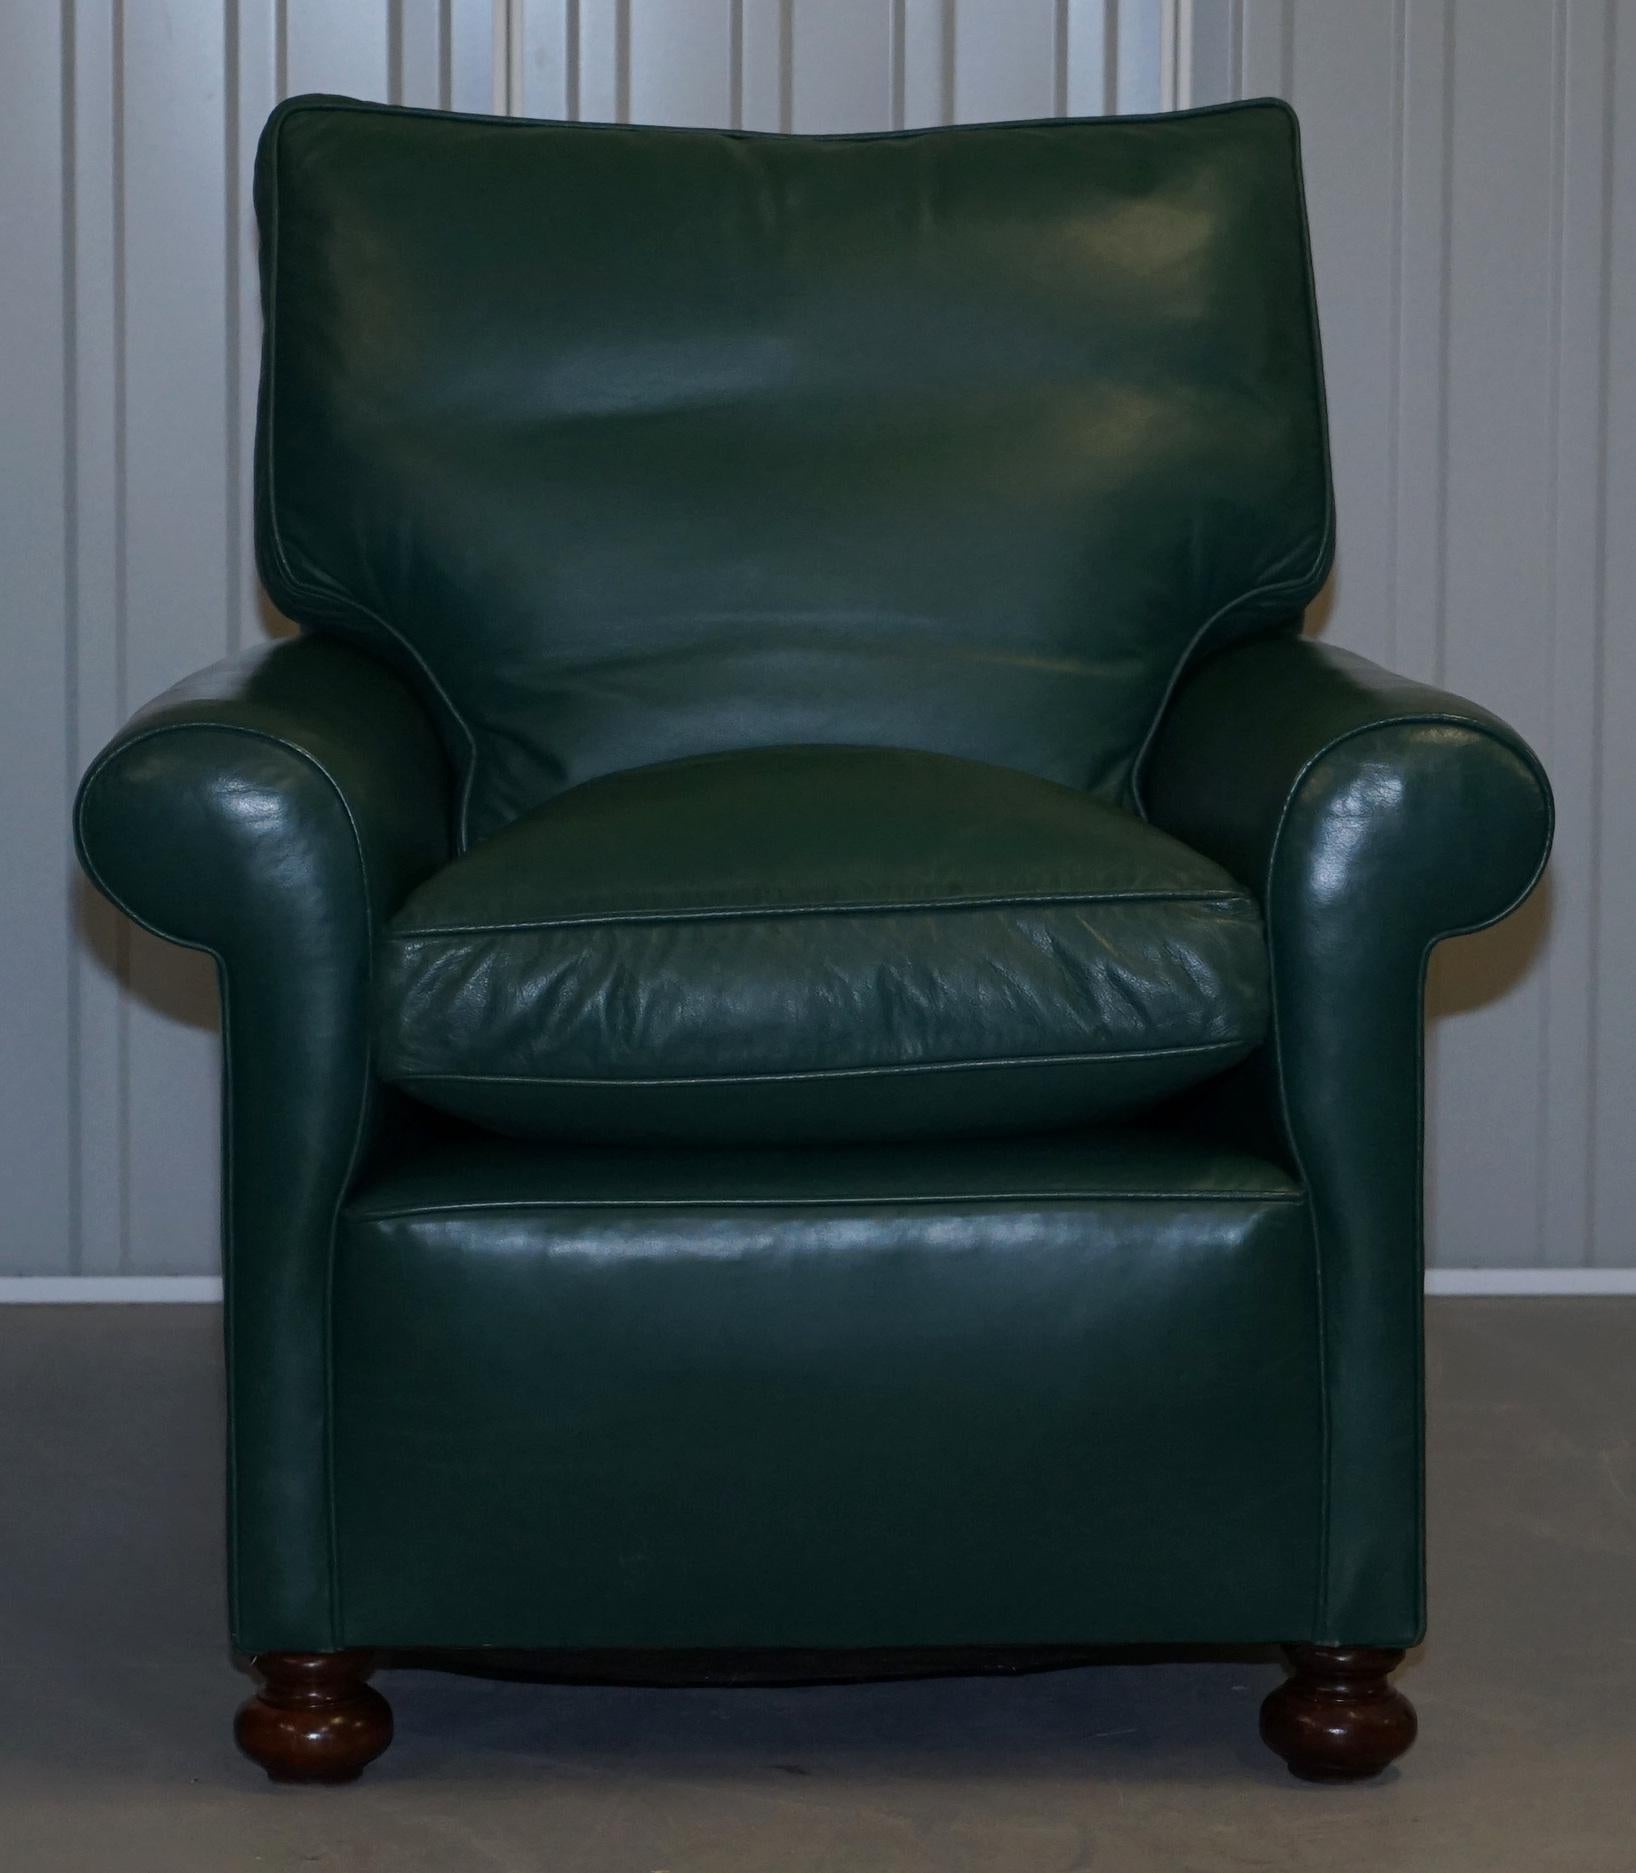 English Pair of Edwardian circa 1910 Soft Green Leather Feather Filled Cushion Armchairs